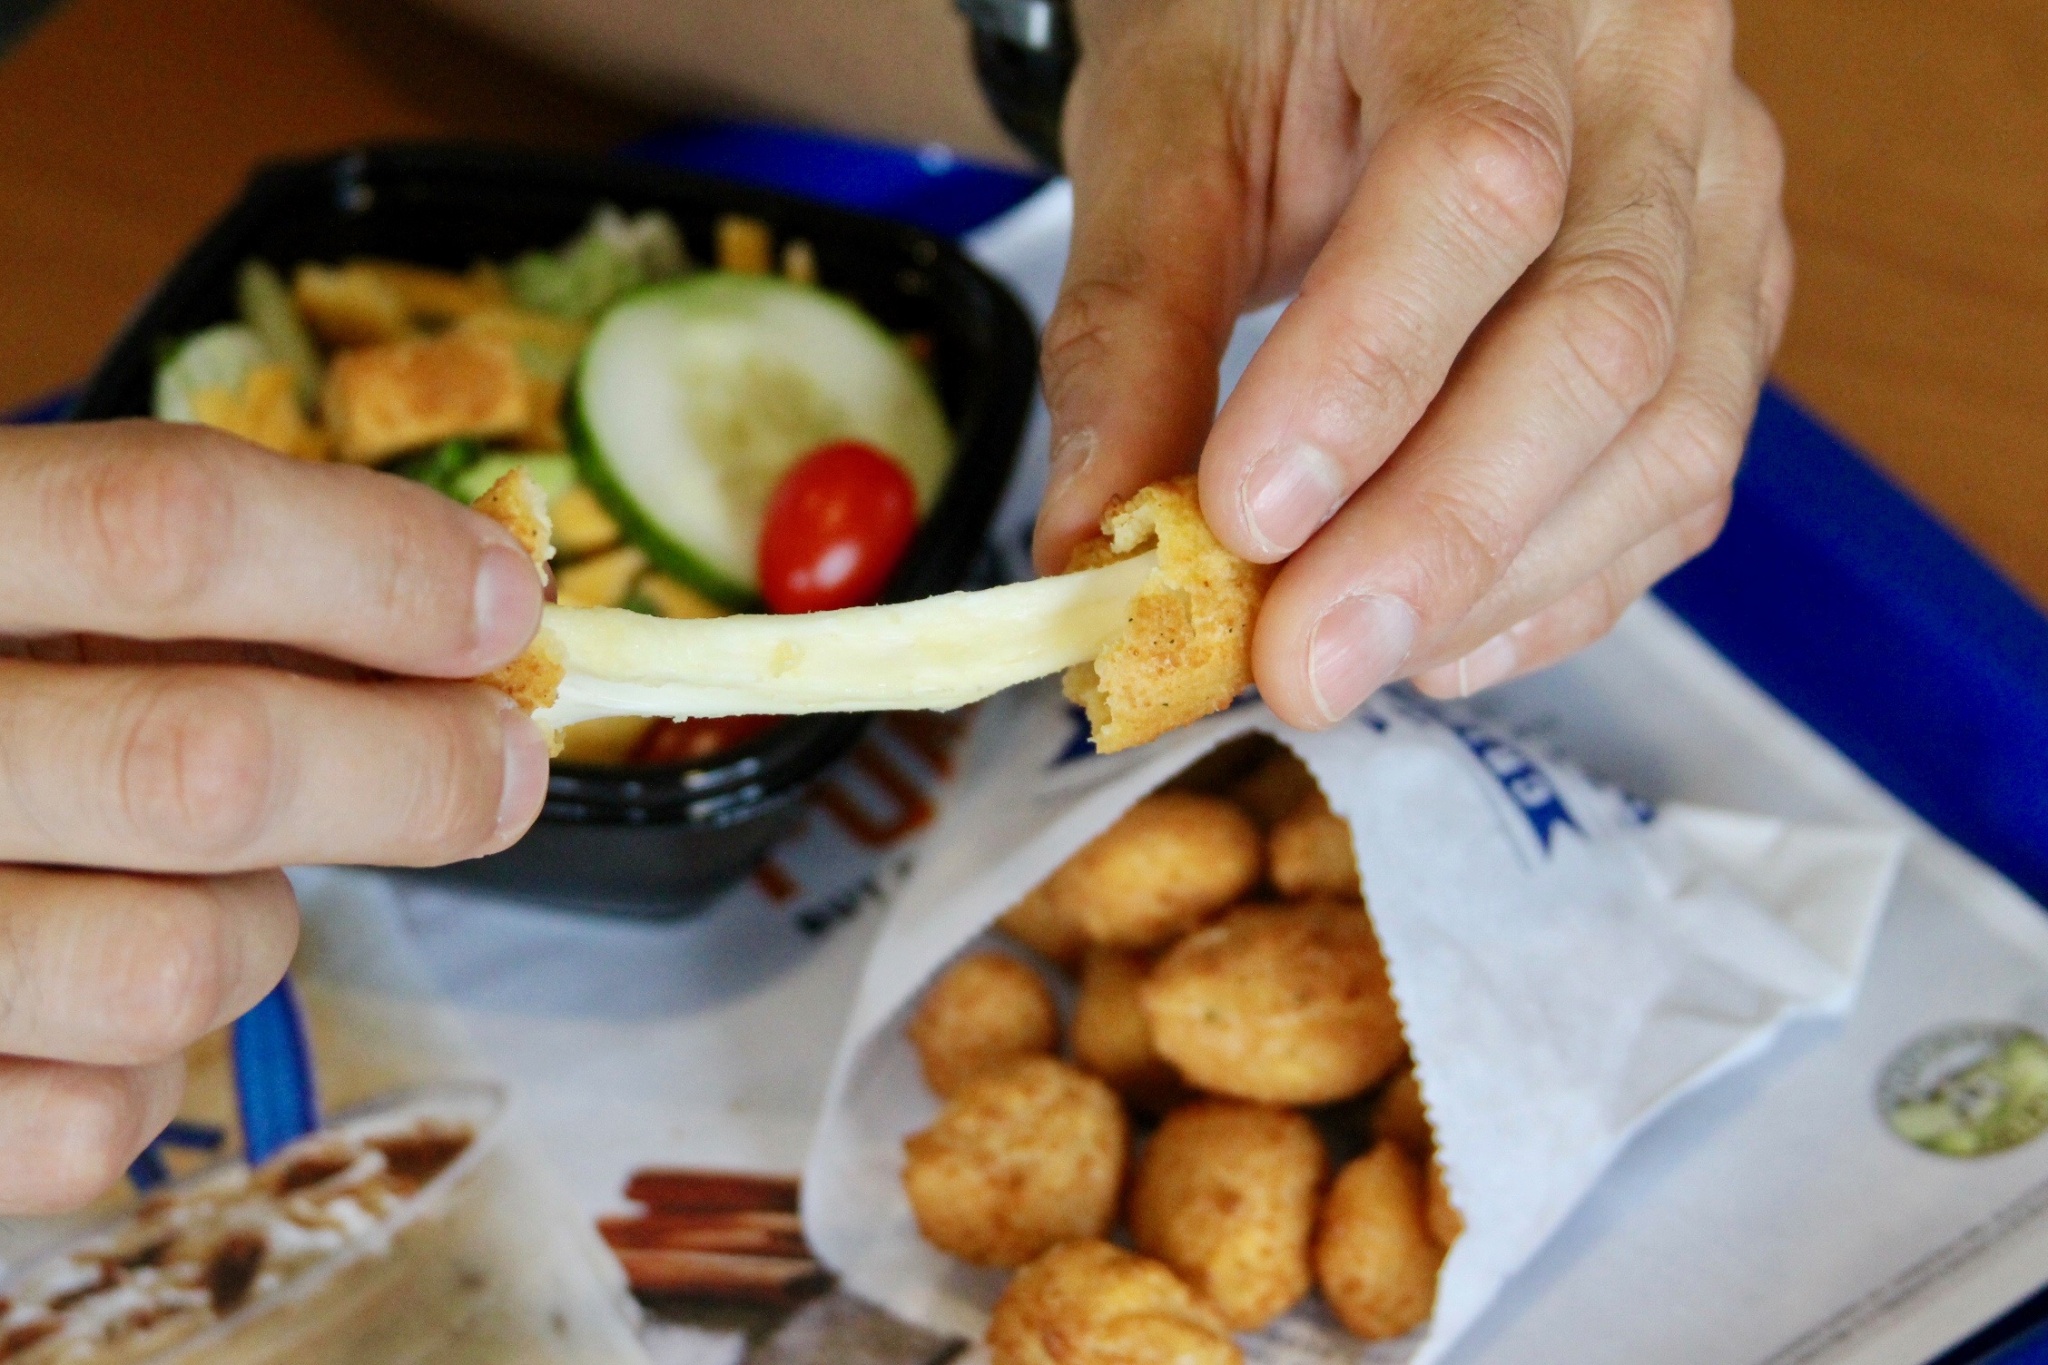 Cheese curds at Culvers